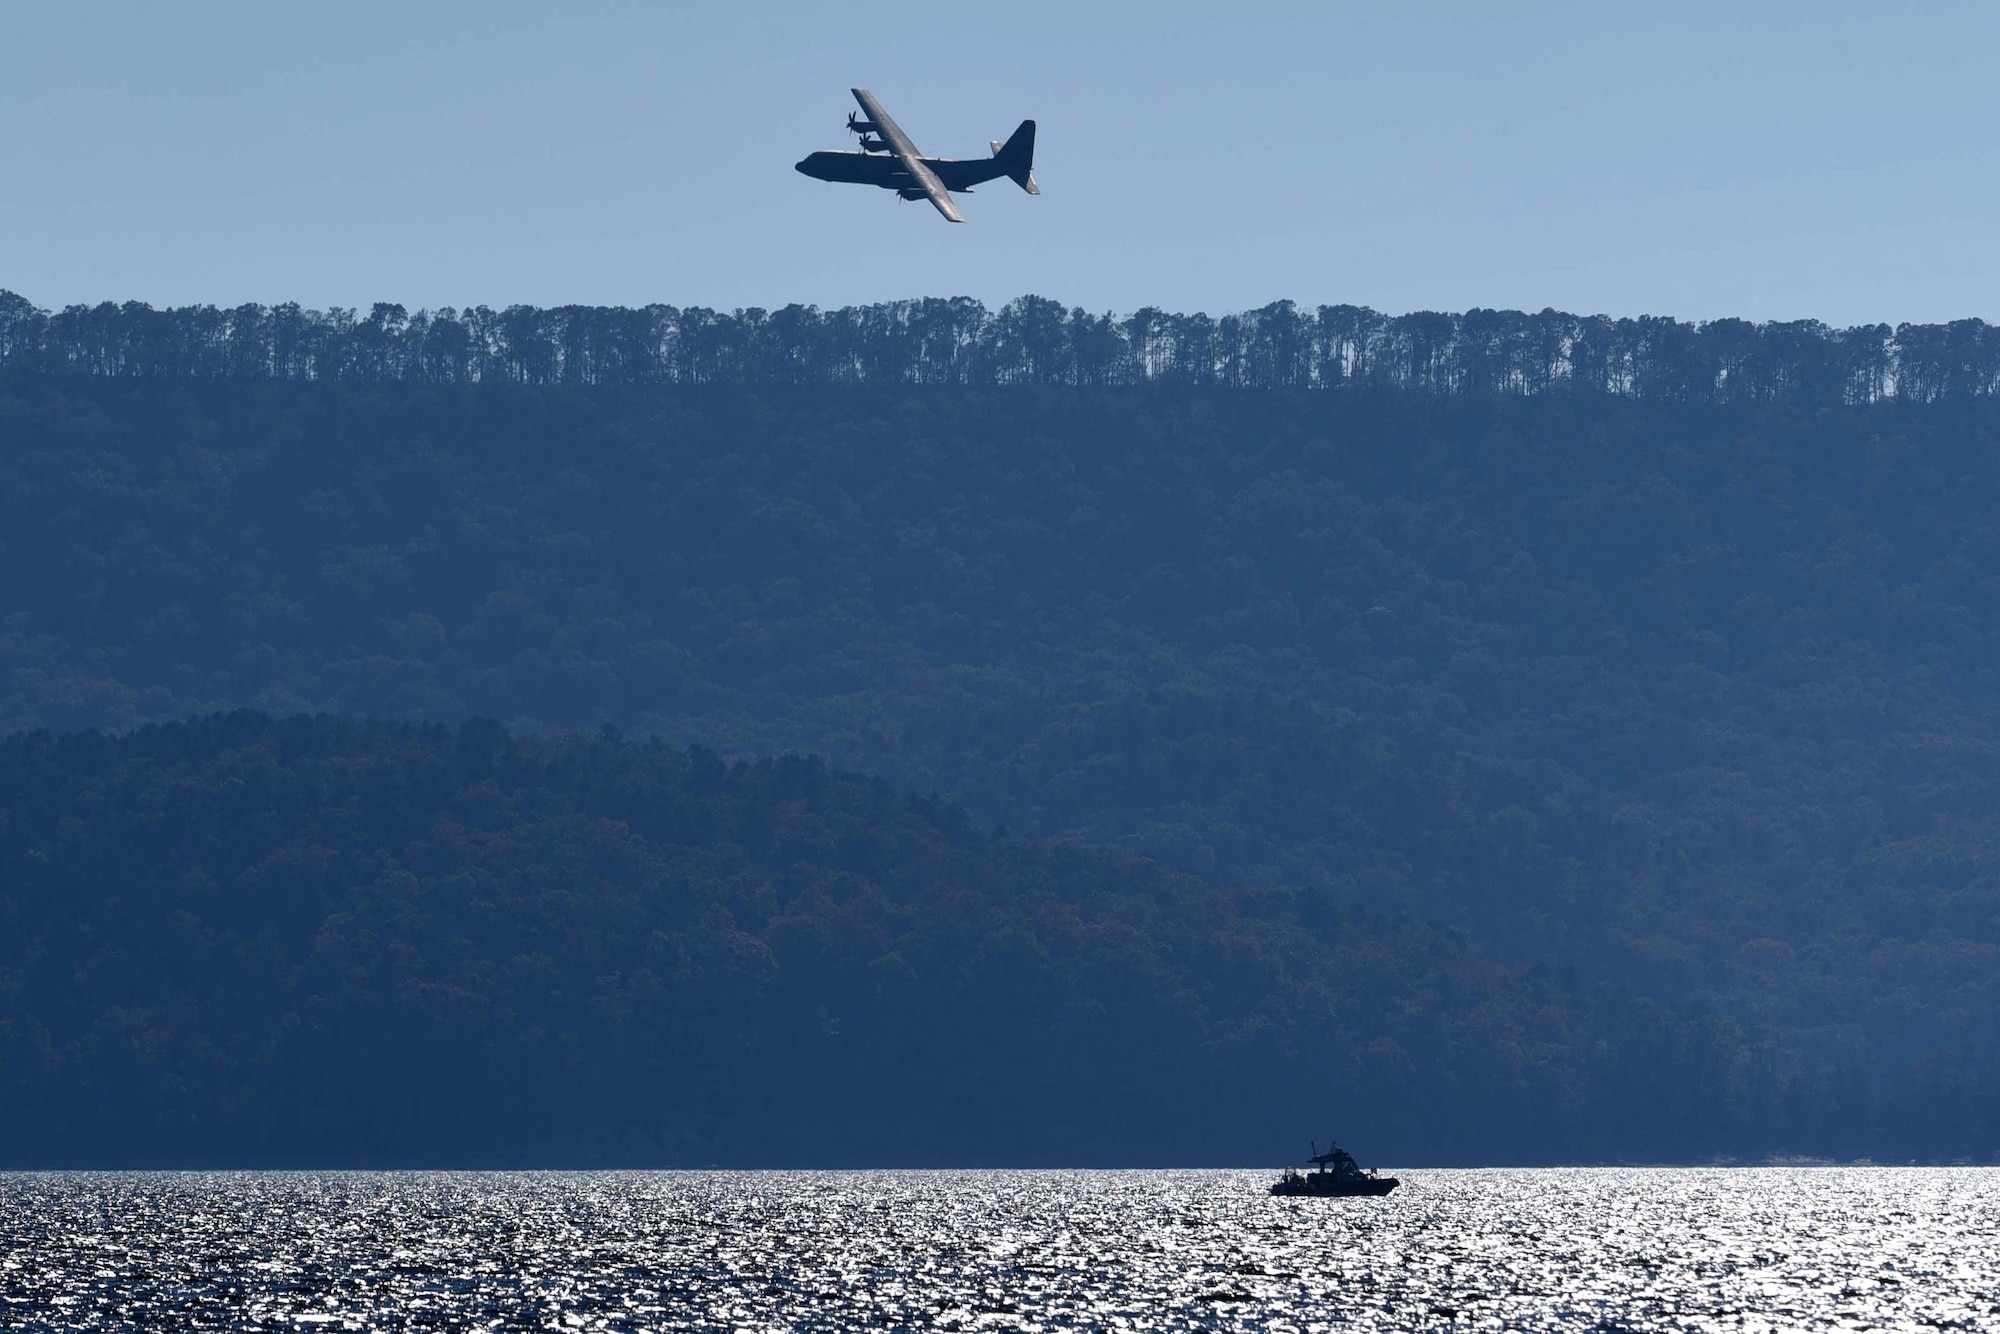 A C-130J assigned to the 19th Airlift Wing enters the assessment area during a search and rescue exercise as part of a Turkey Shoot competition, Nov. 17, 2016, at Lake Ouachita, Ark. Each aircraft had 30 minutes to search the area, locate the objective and drop supplies nearest to the target.  (U.S. Air Force photo by Airman 1st Class Kevin Sommer Giron)